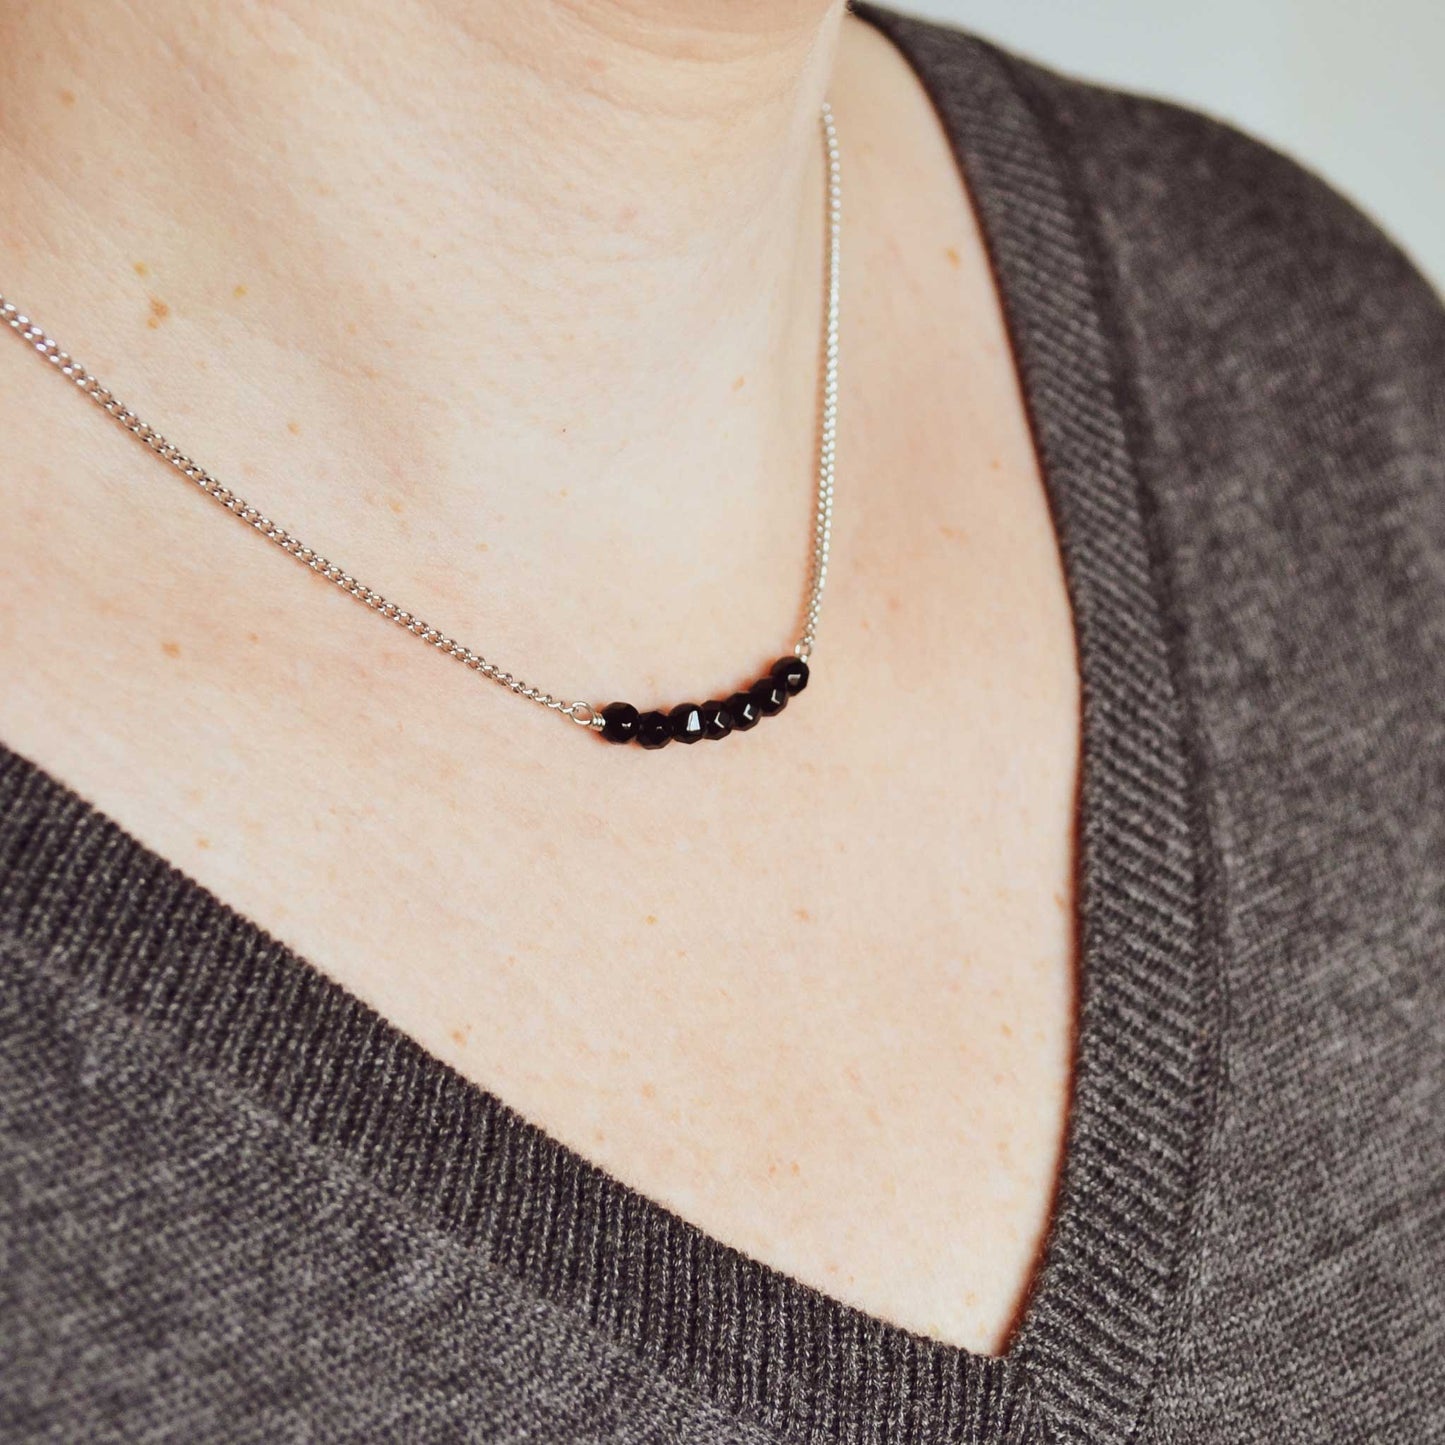 Woman wearing grey v neck jumper and dainty Onyx necklace